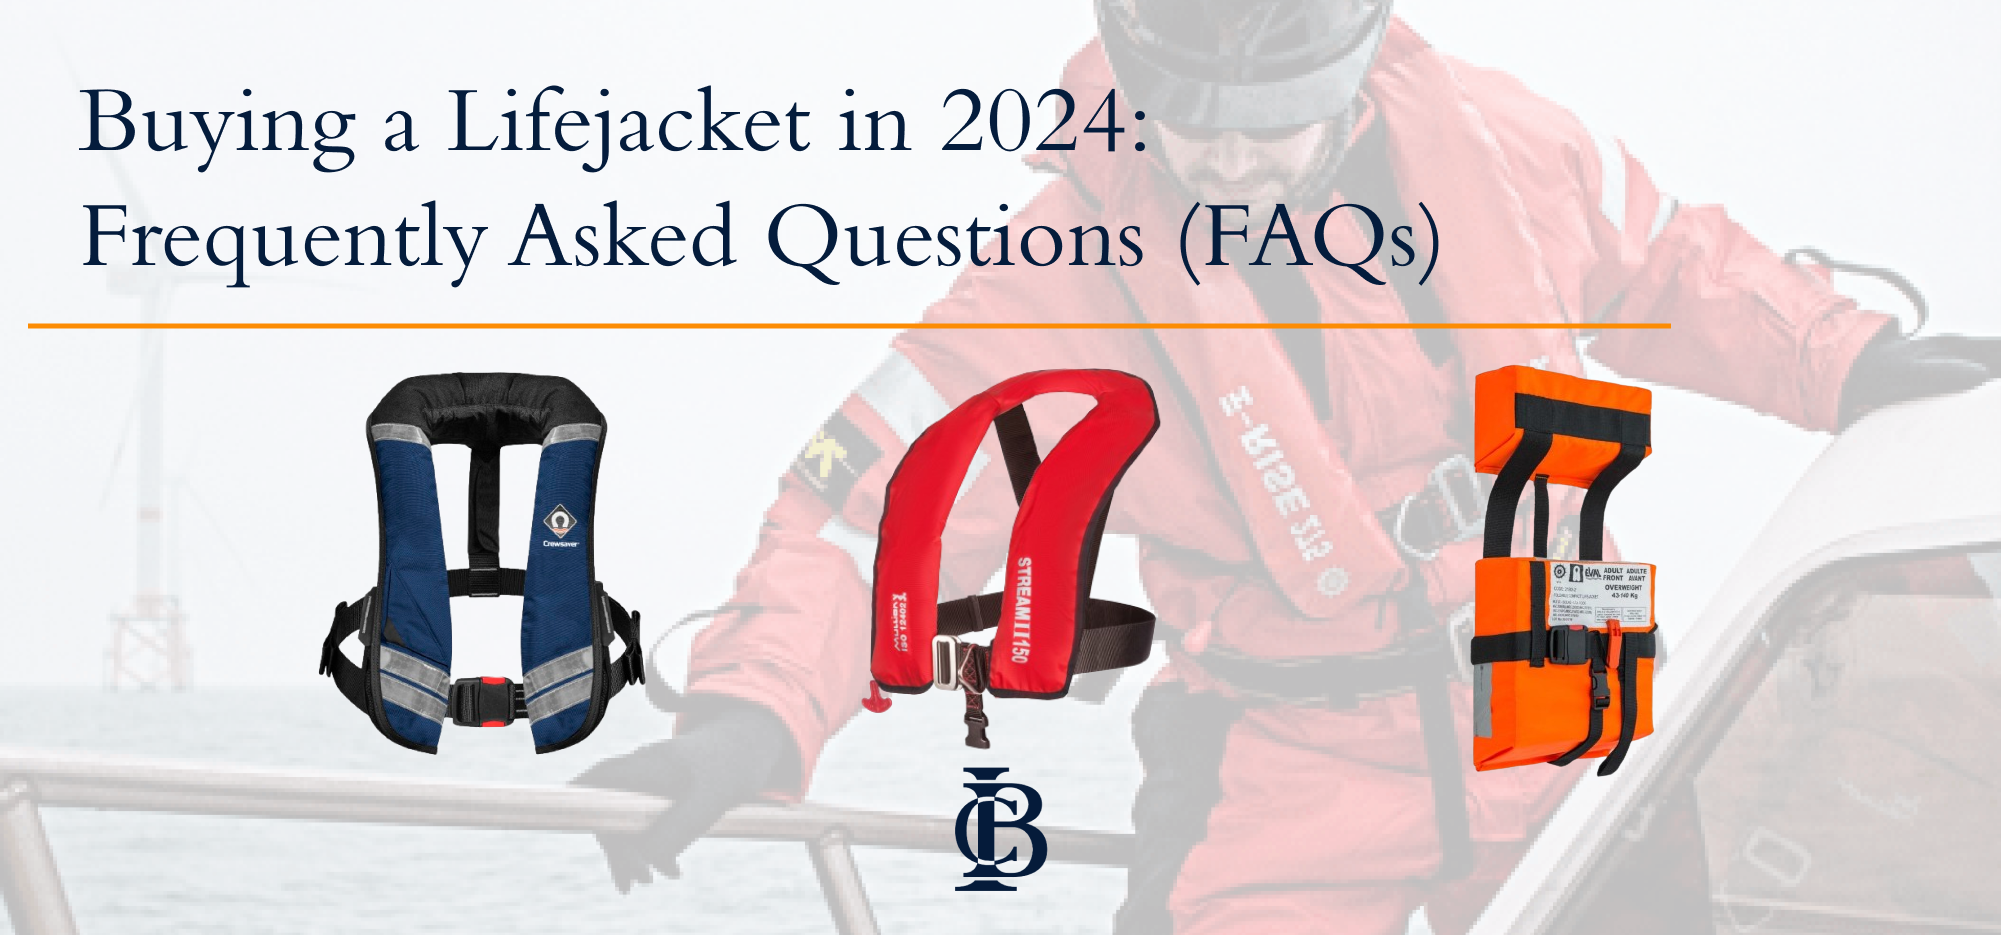 Buying a Lifejacket in 2024: Frequently Asked Questions 